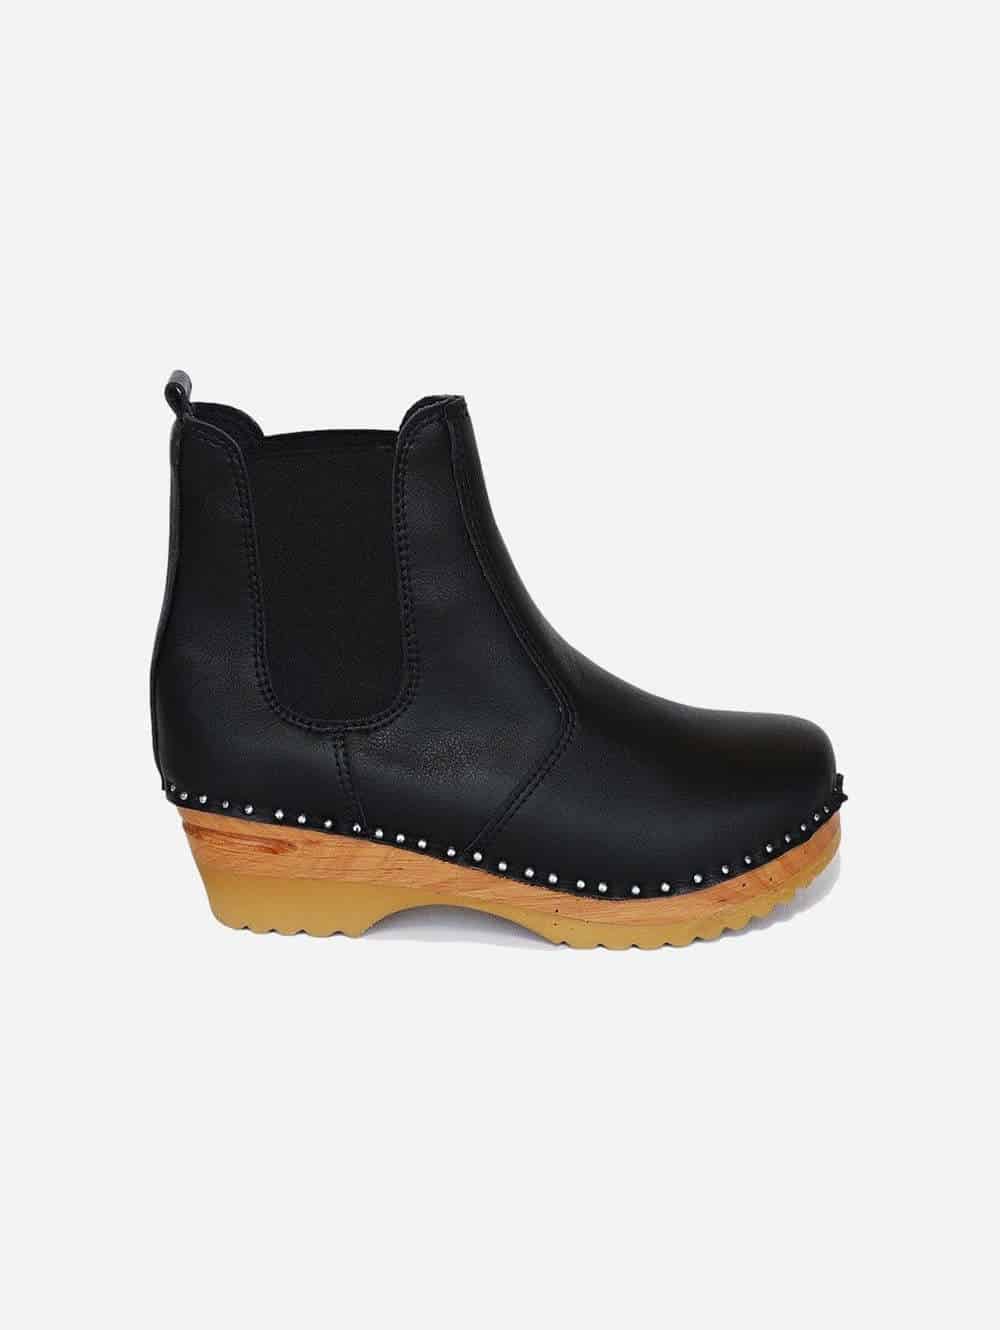 Clog boots with black vegan leather Chelsea boot upper